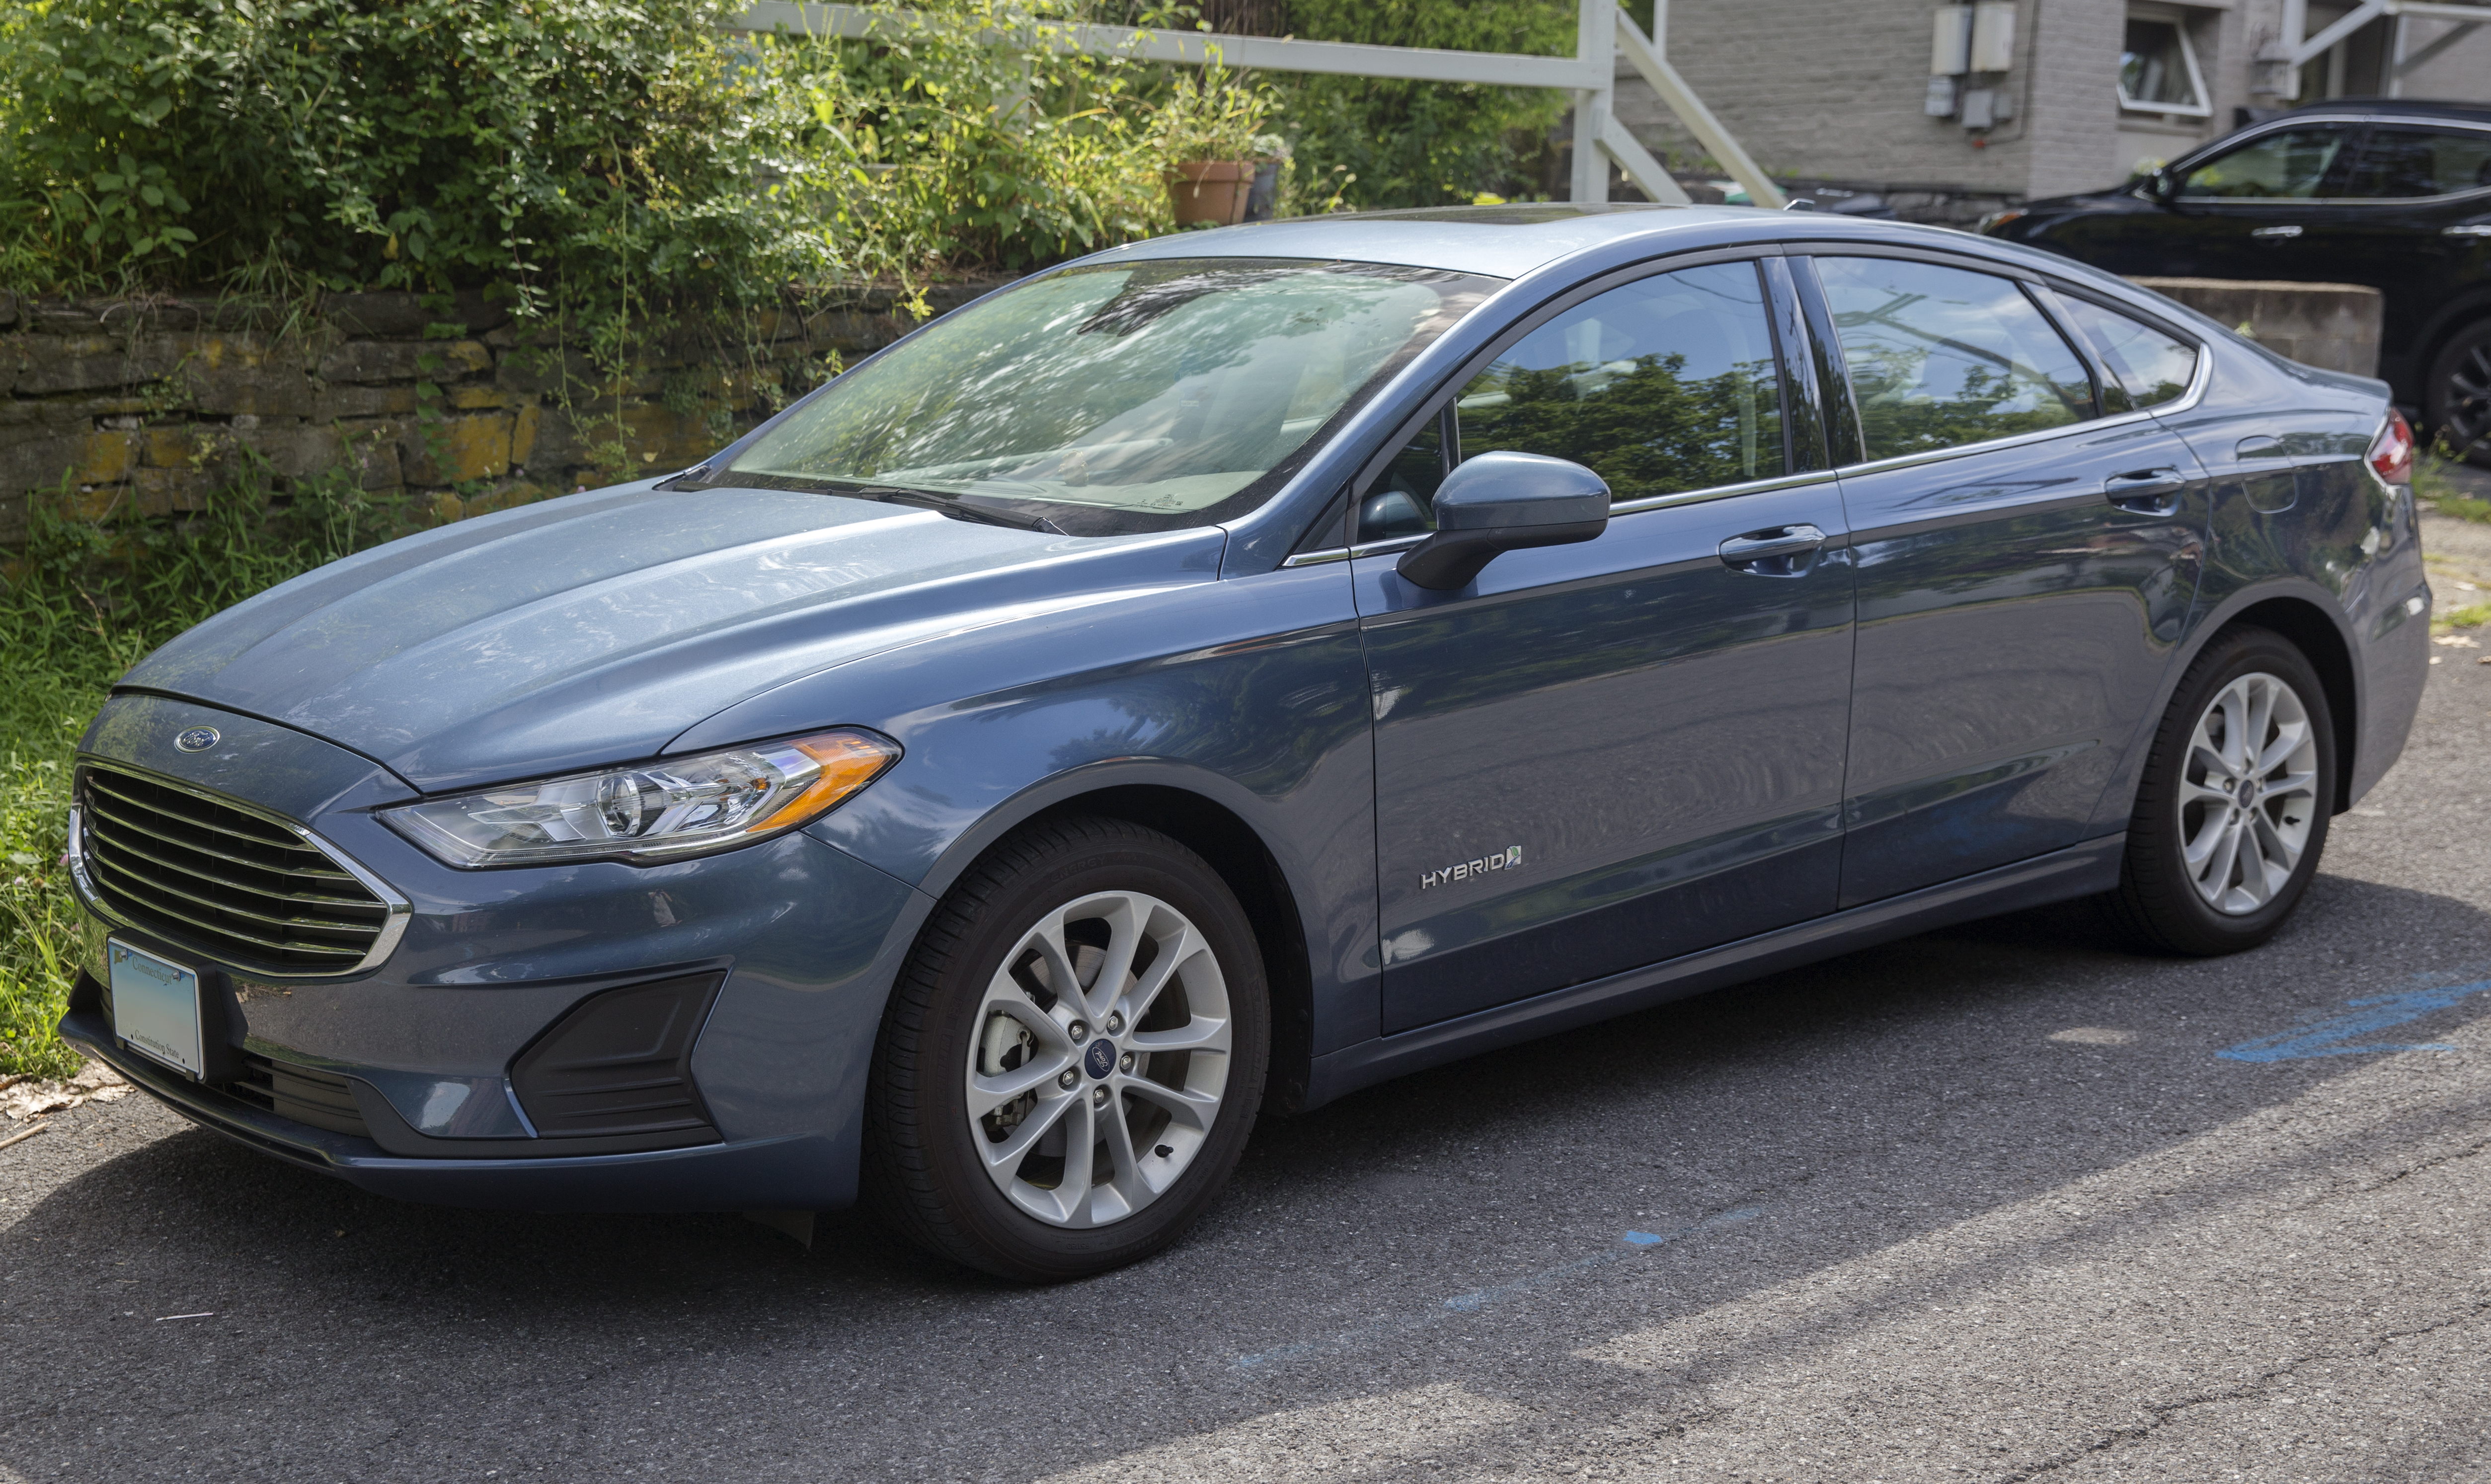 File:2019 Ford Fusion Hybrid SE, Blue, front left.jpg - Wikimedia Commons